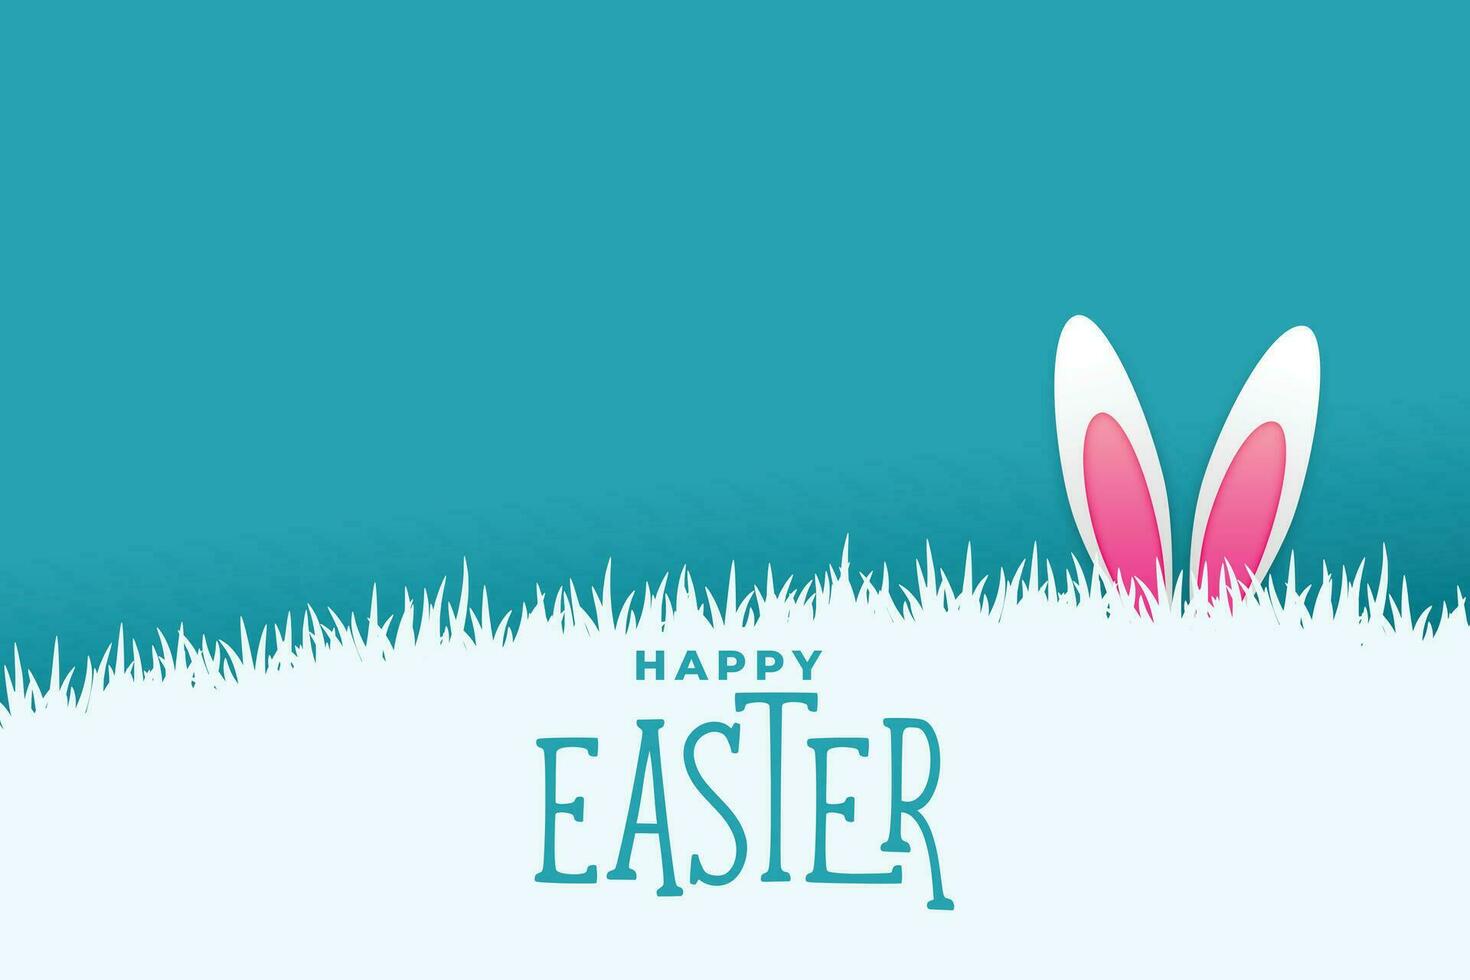 easter card with bunny rabbit peeing behind grass vector